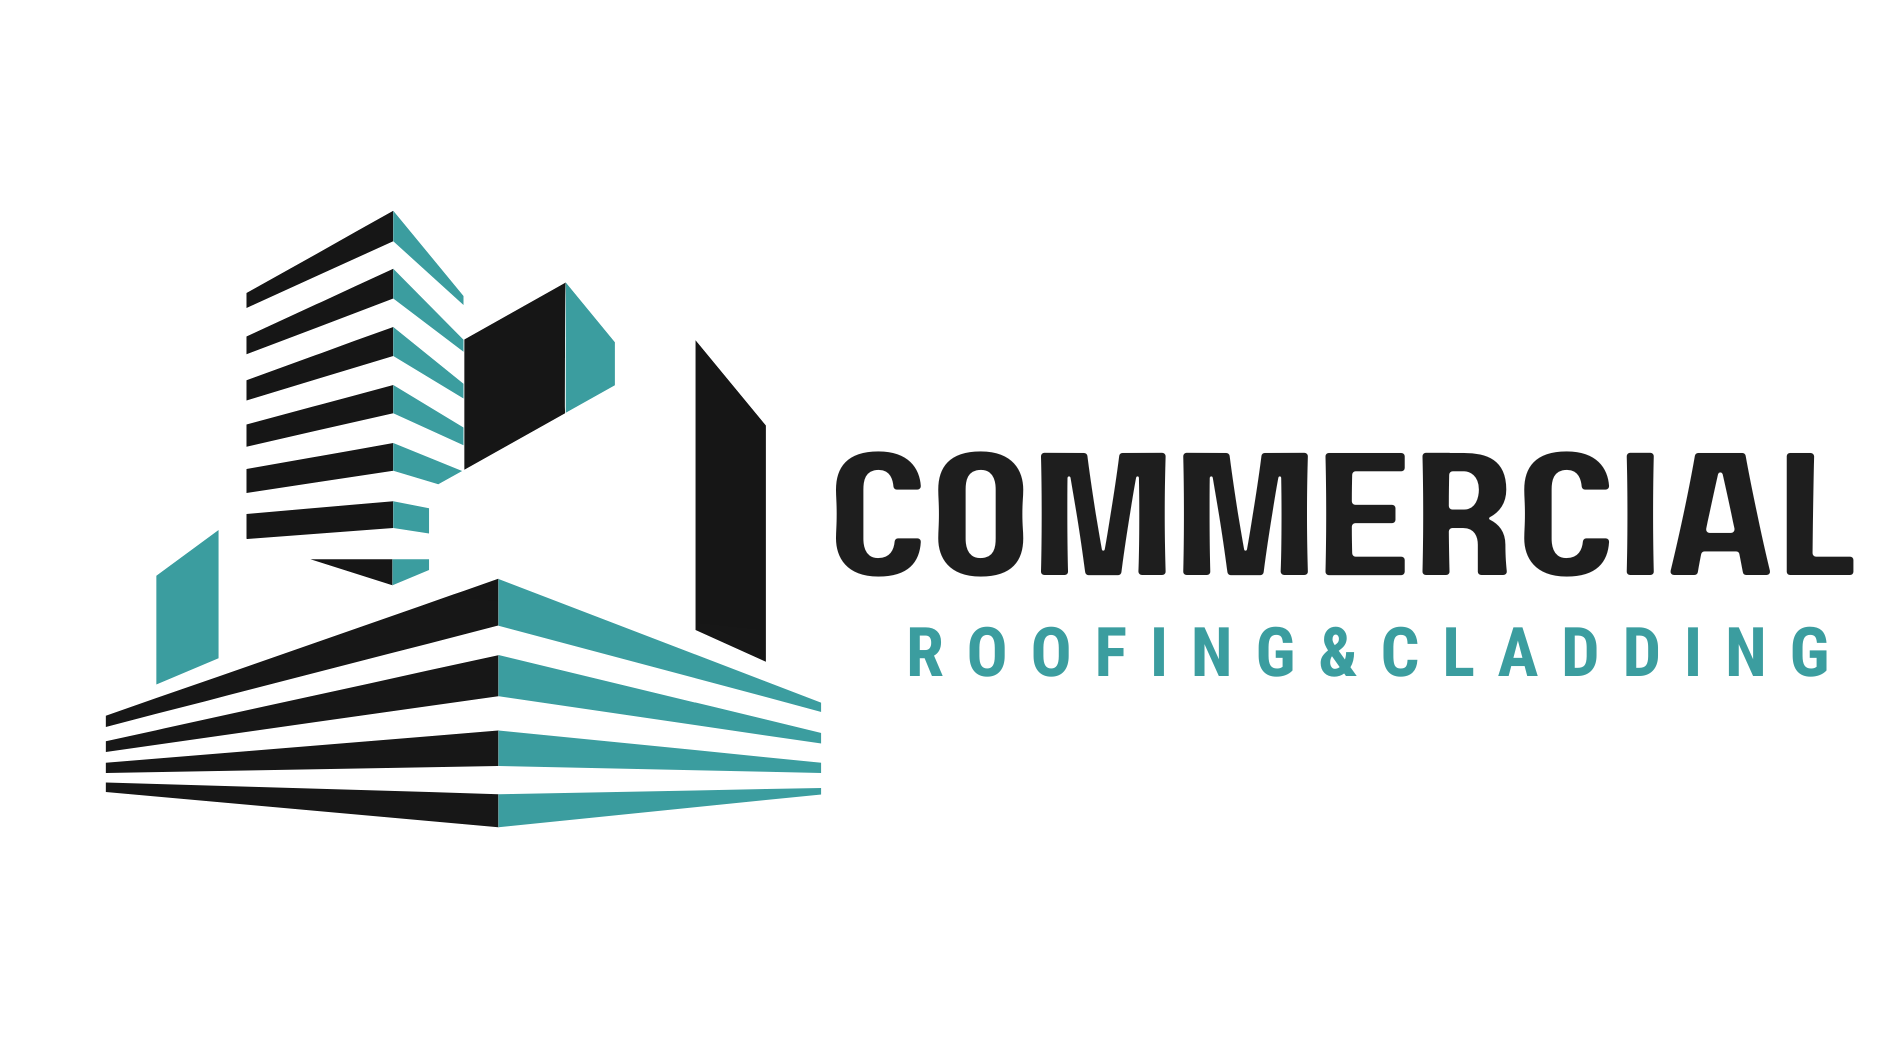 Logo of Commercial Roofing Cladding Ltd